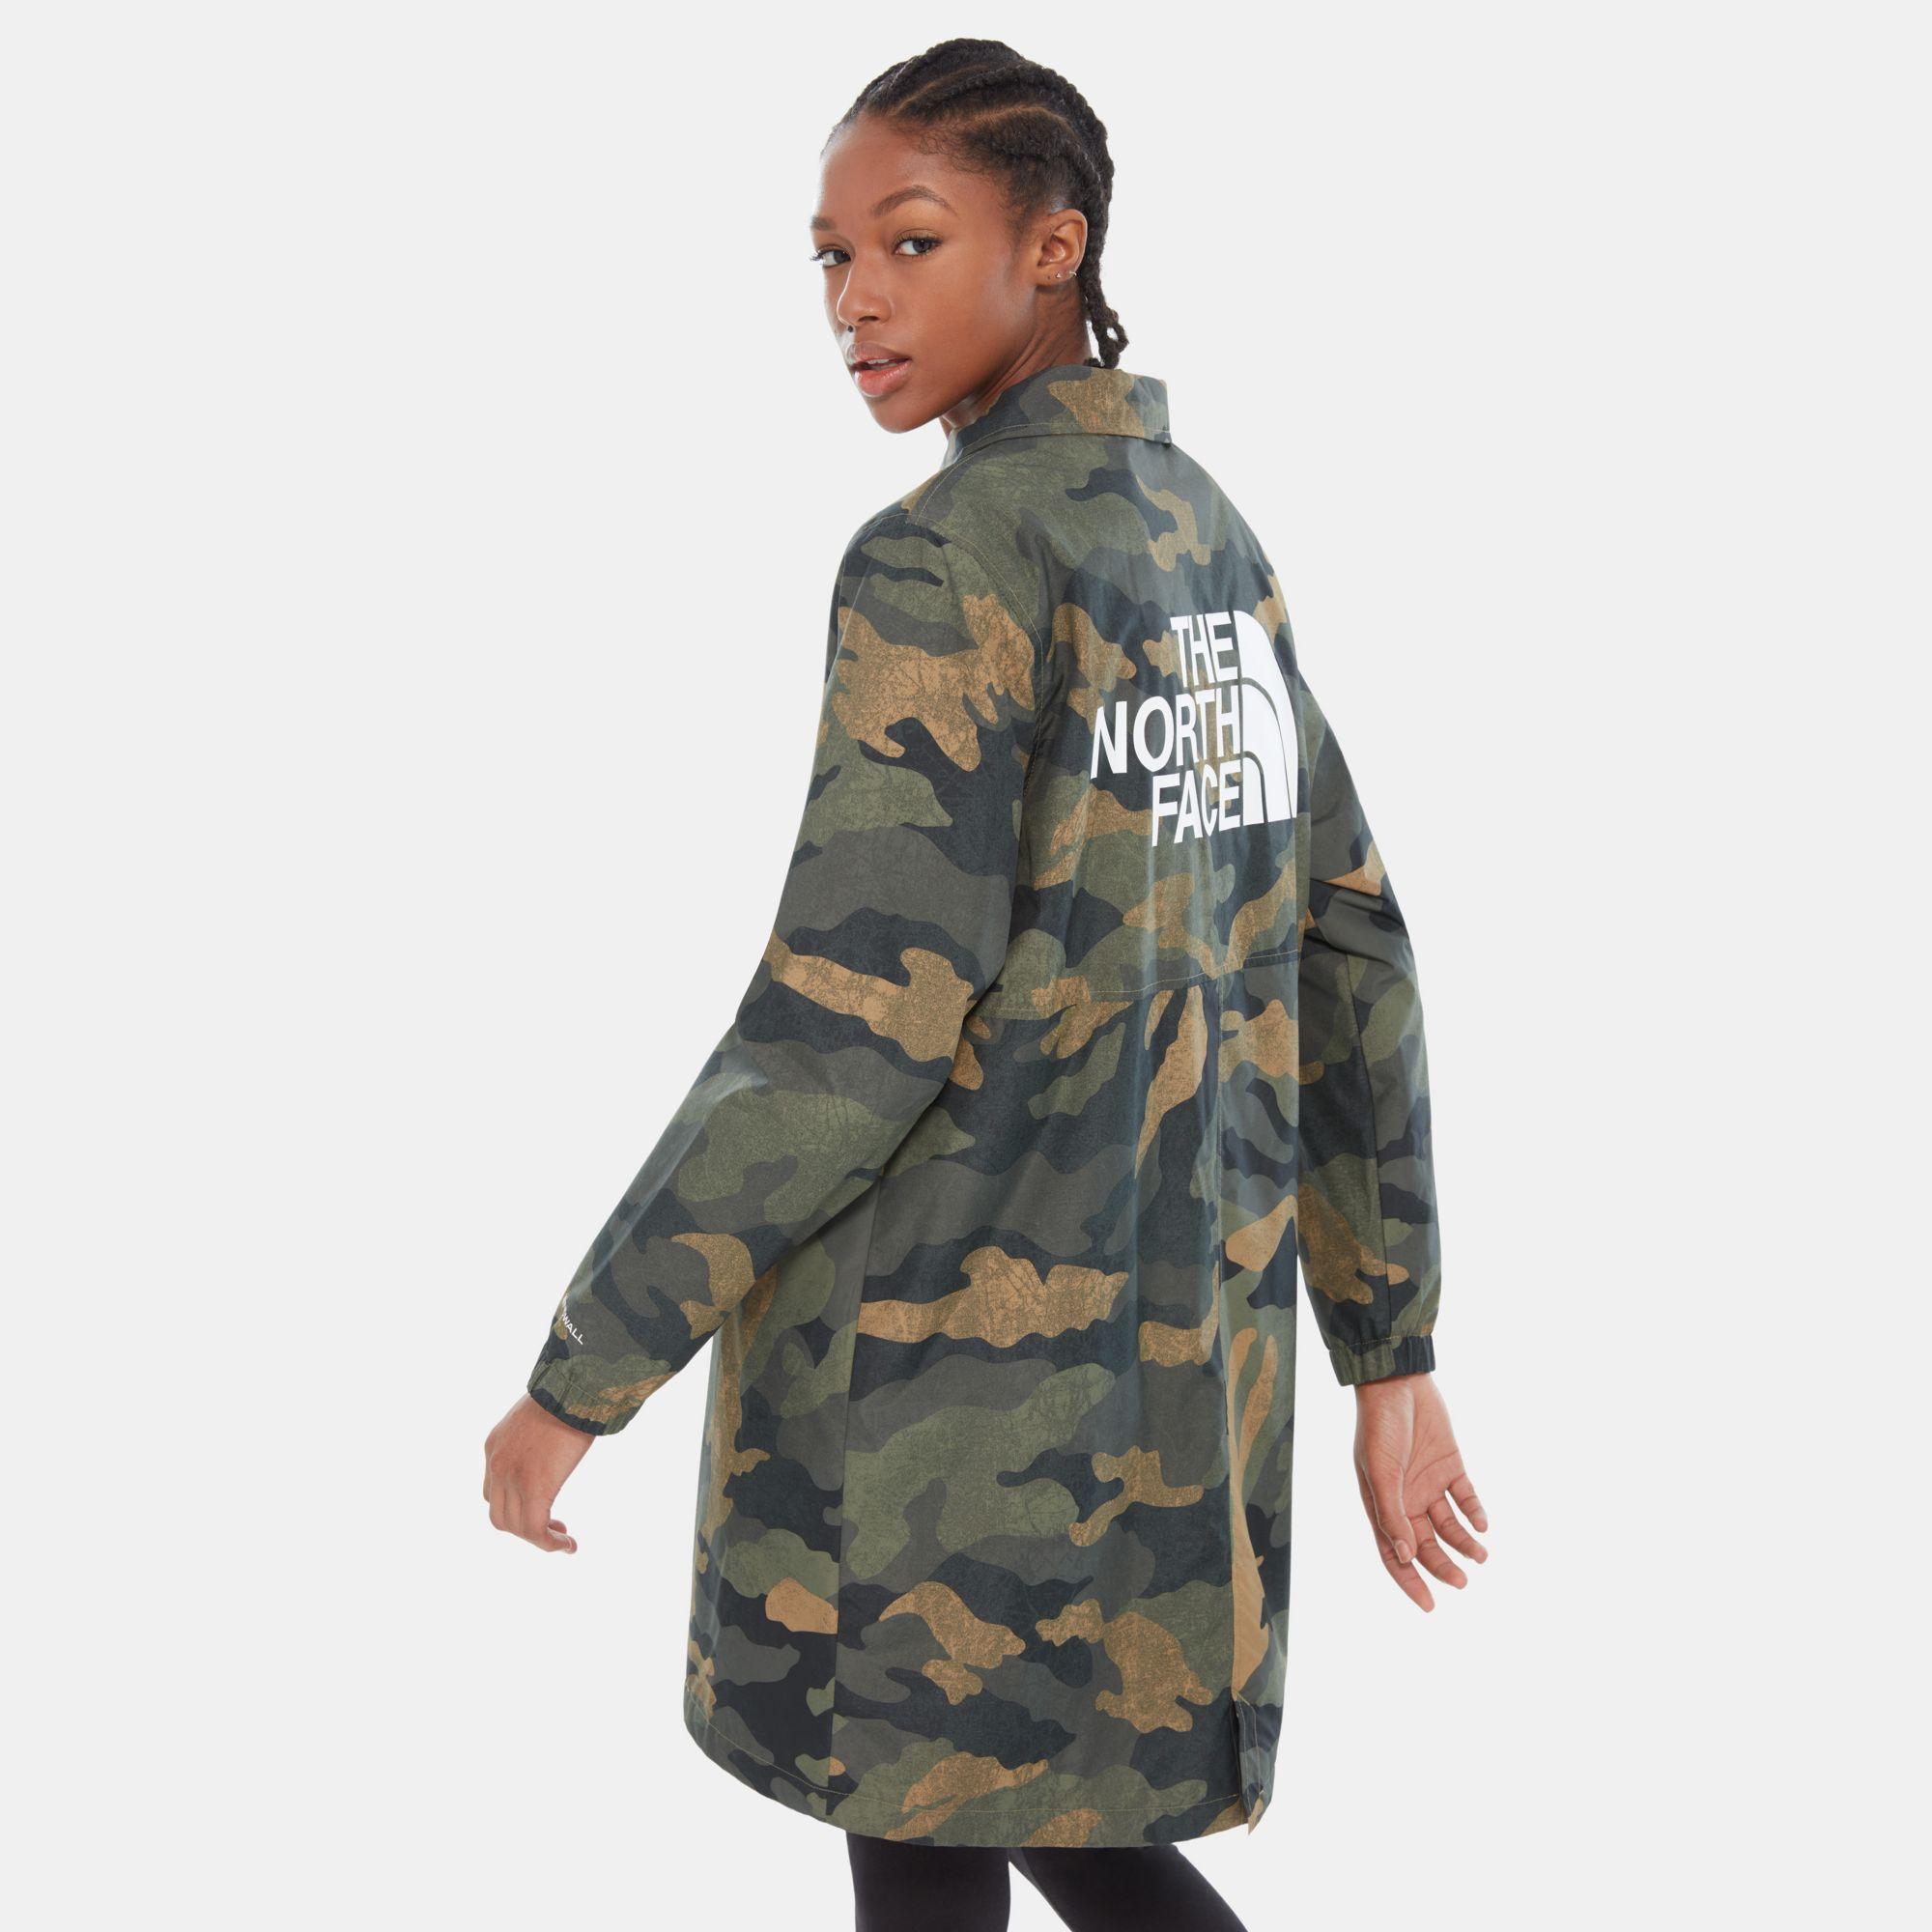 The North Face Telegraphic Coaches Jacke Burnt Olive Waxed Camo Print in  Grün - Lyst